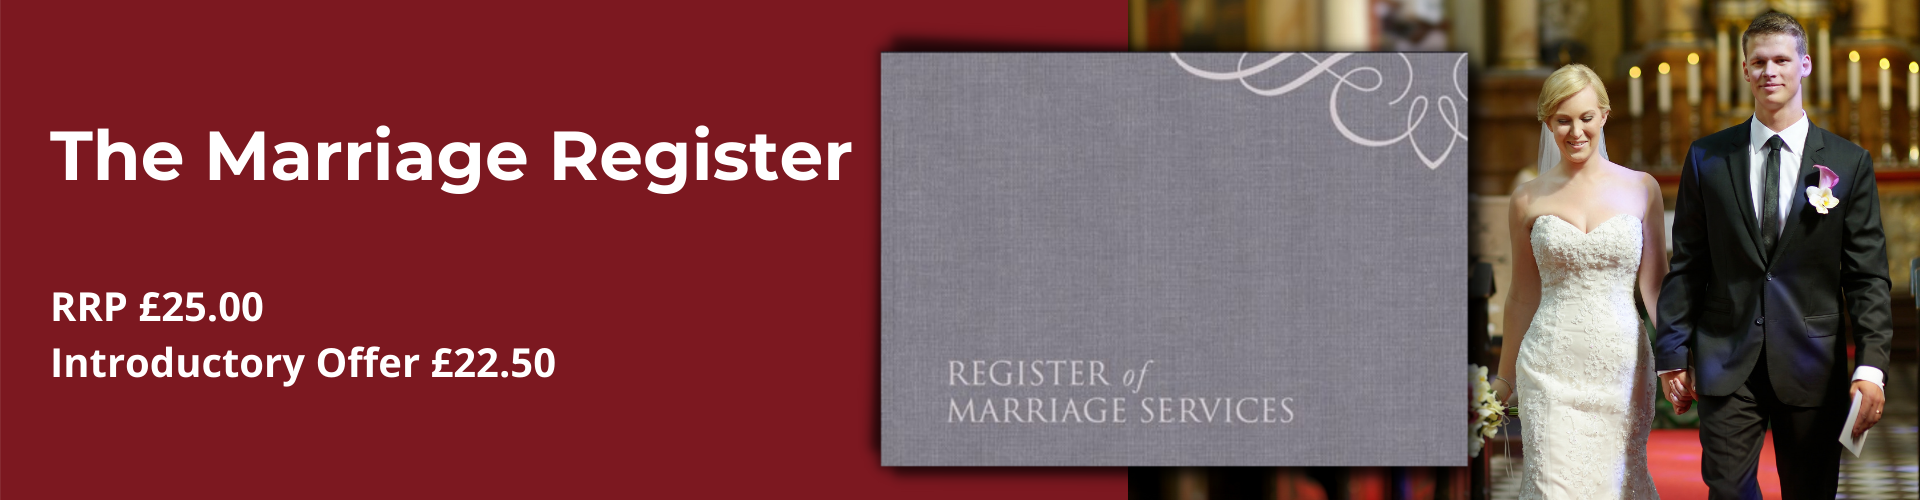 The Marriage Register